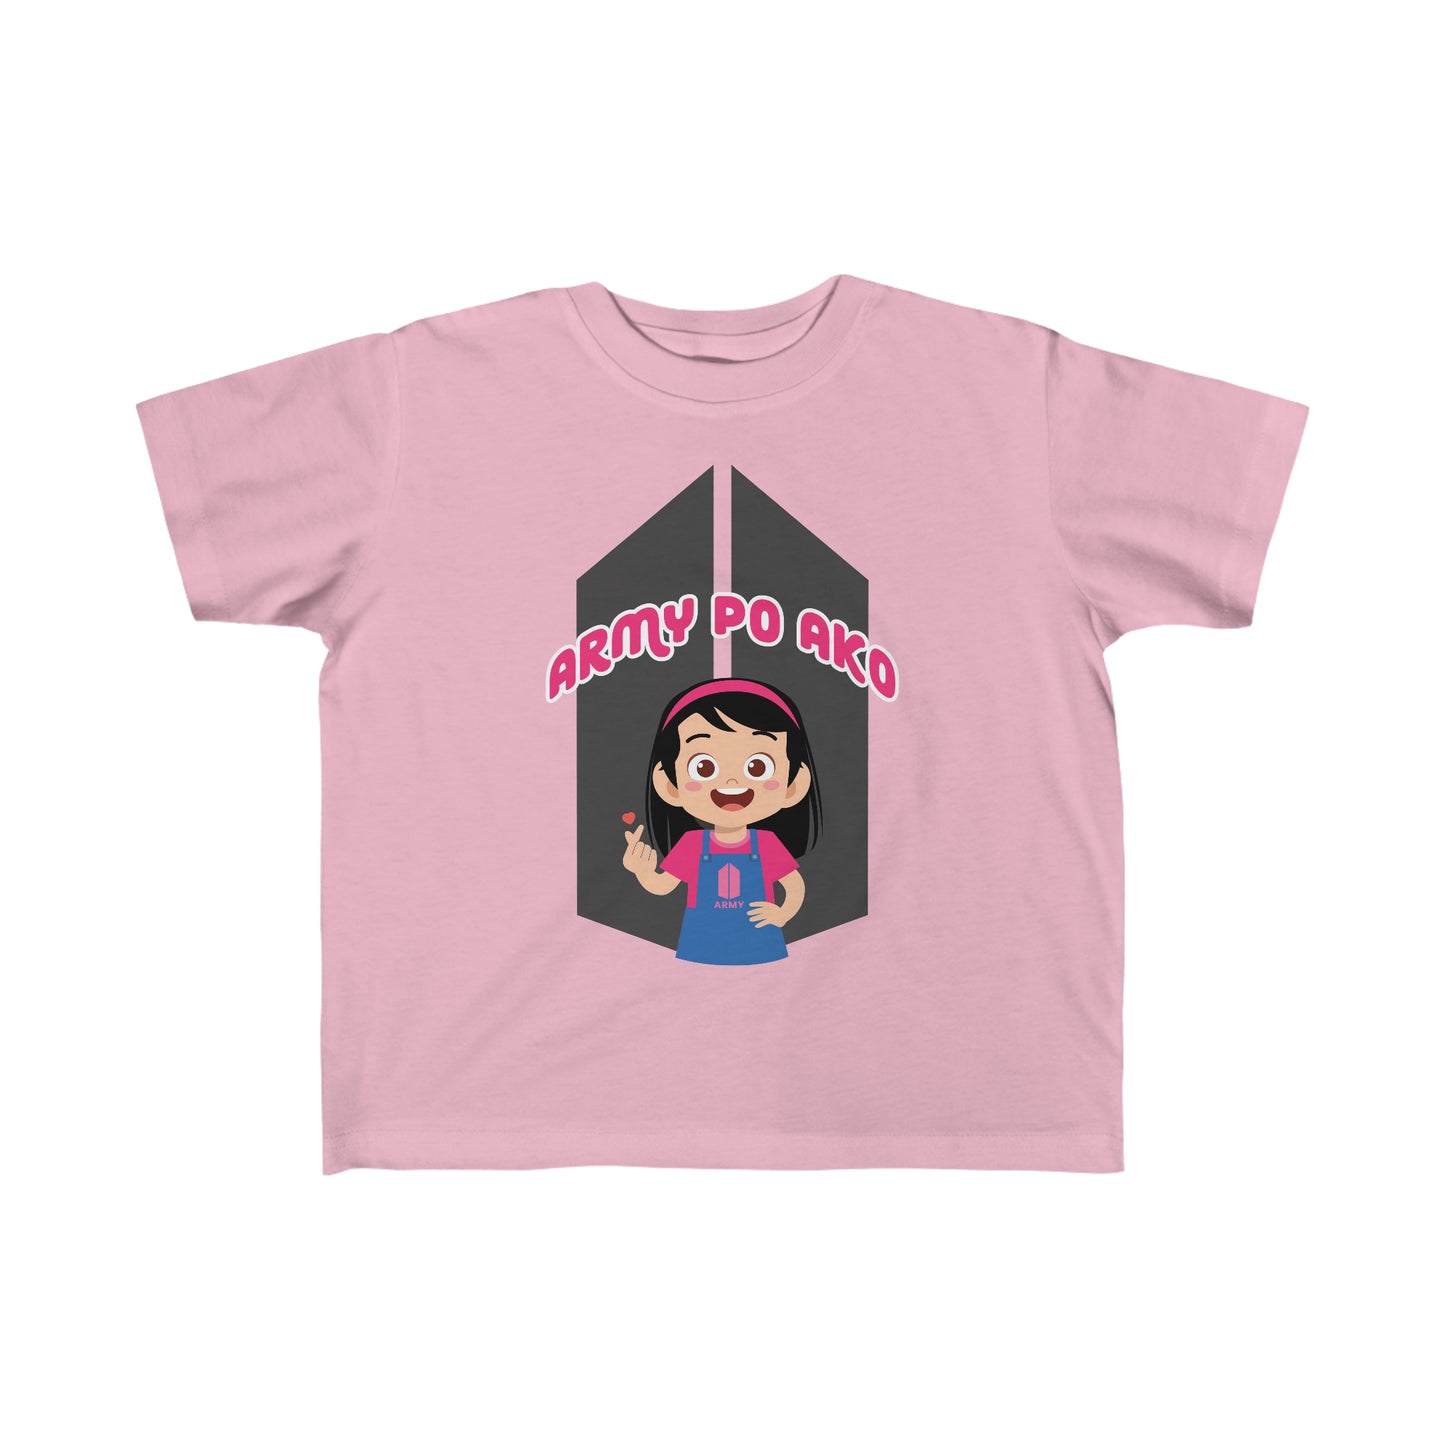 "ARMY PO AKO" Girl Toddler's Fine Jersey Tee